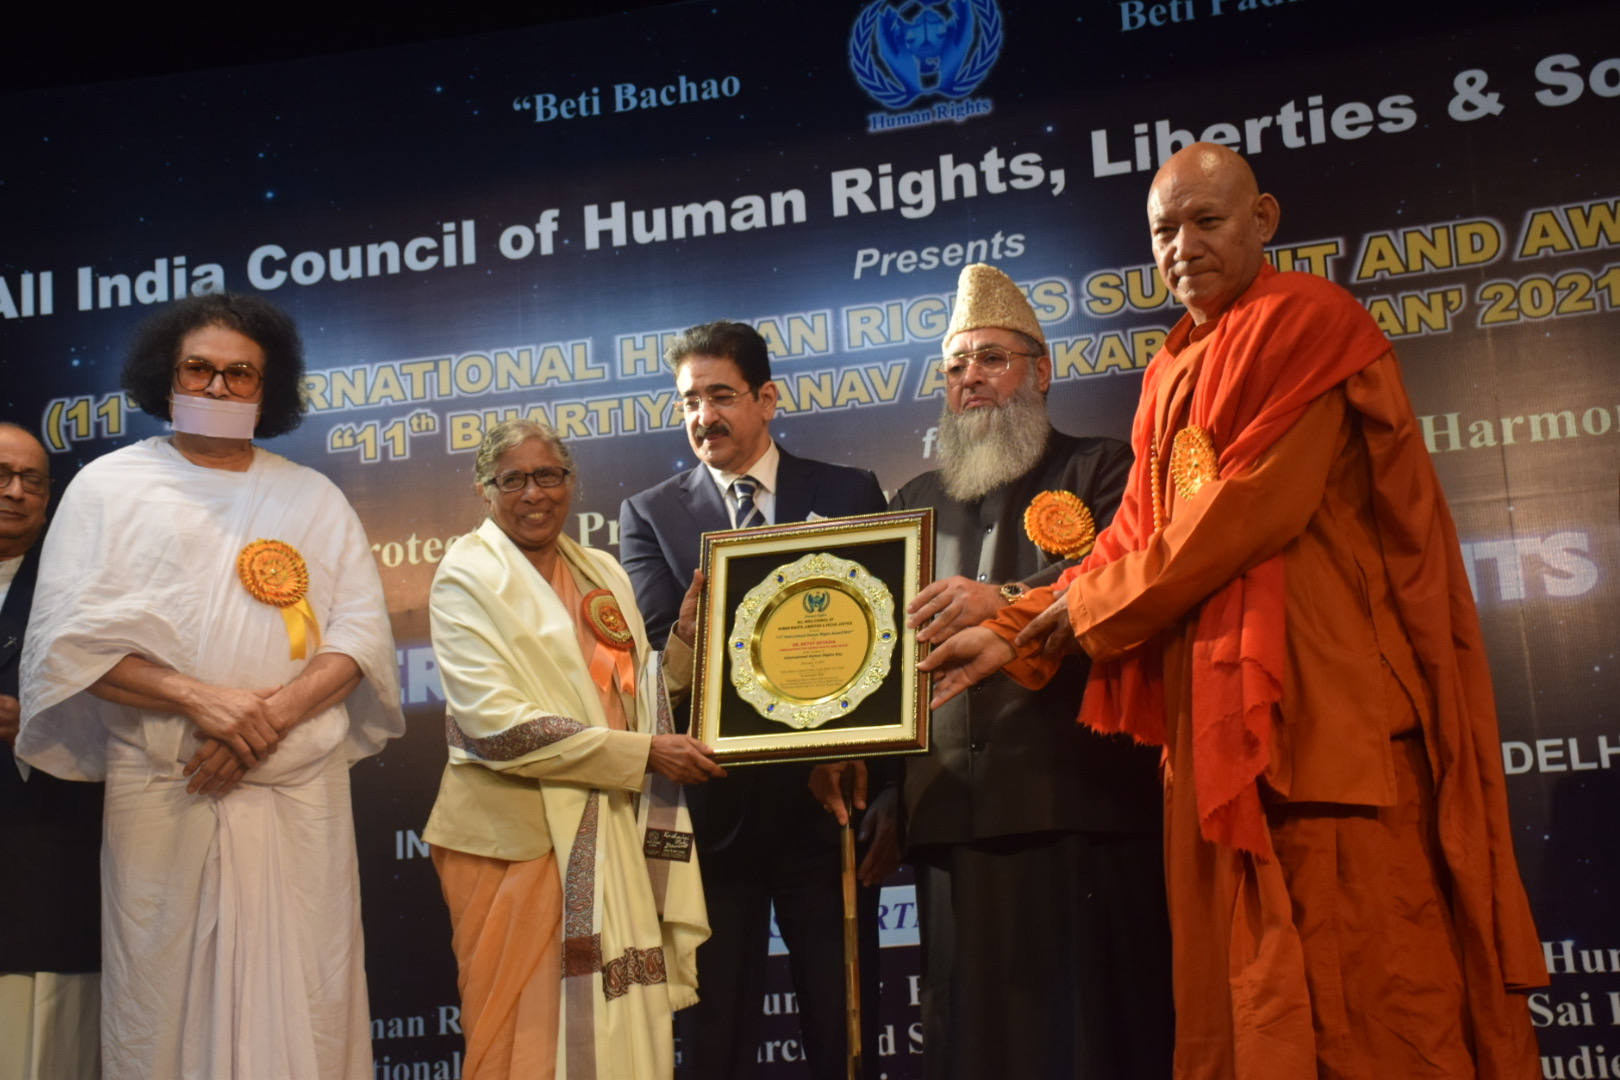 Sister Betsy Devasia Received  the 11th International Human Rights Summit &AWARD  2021